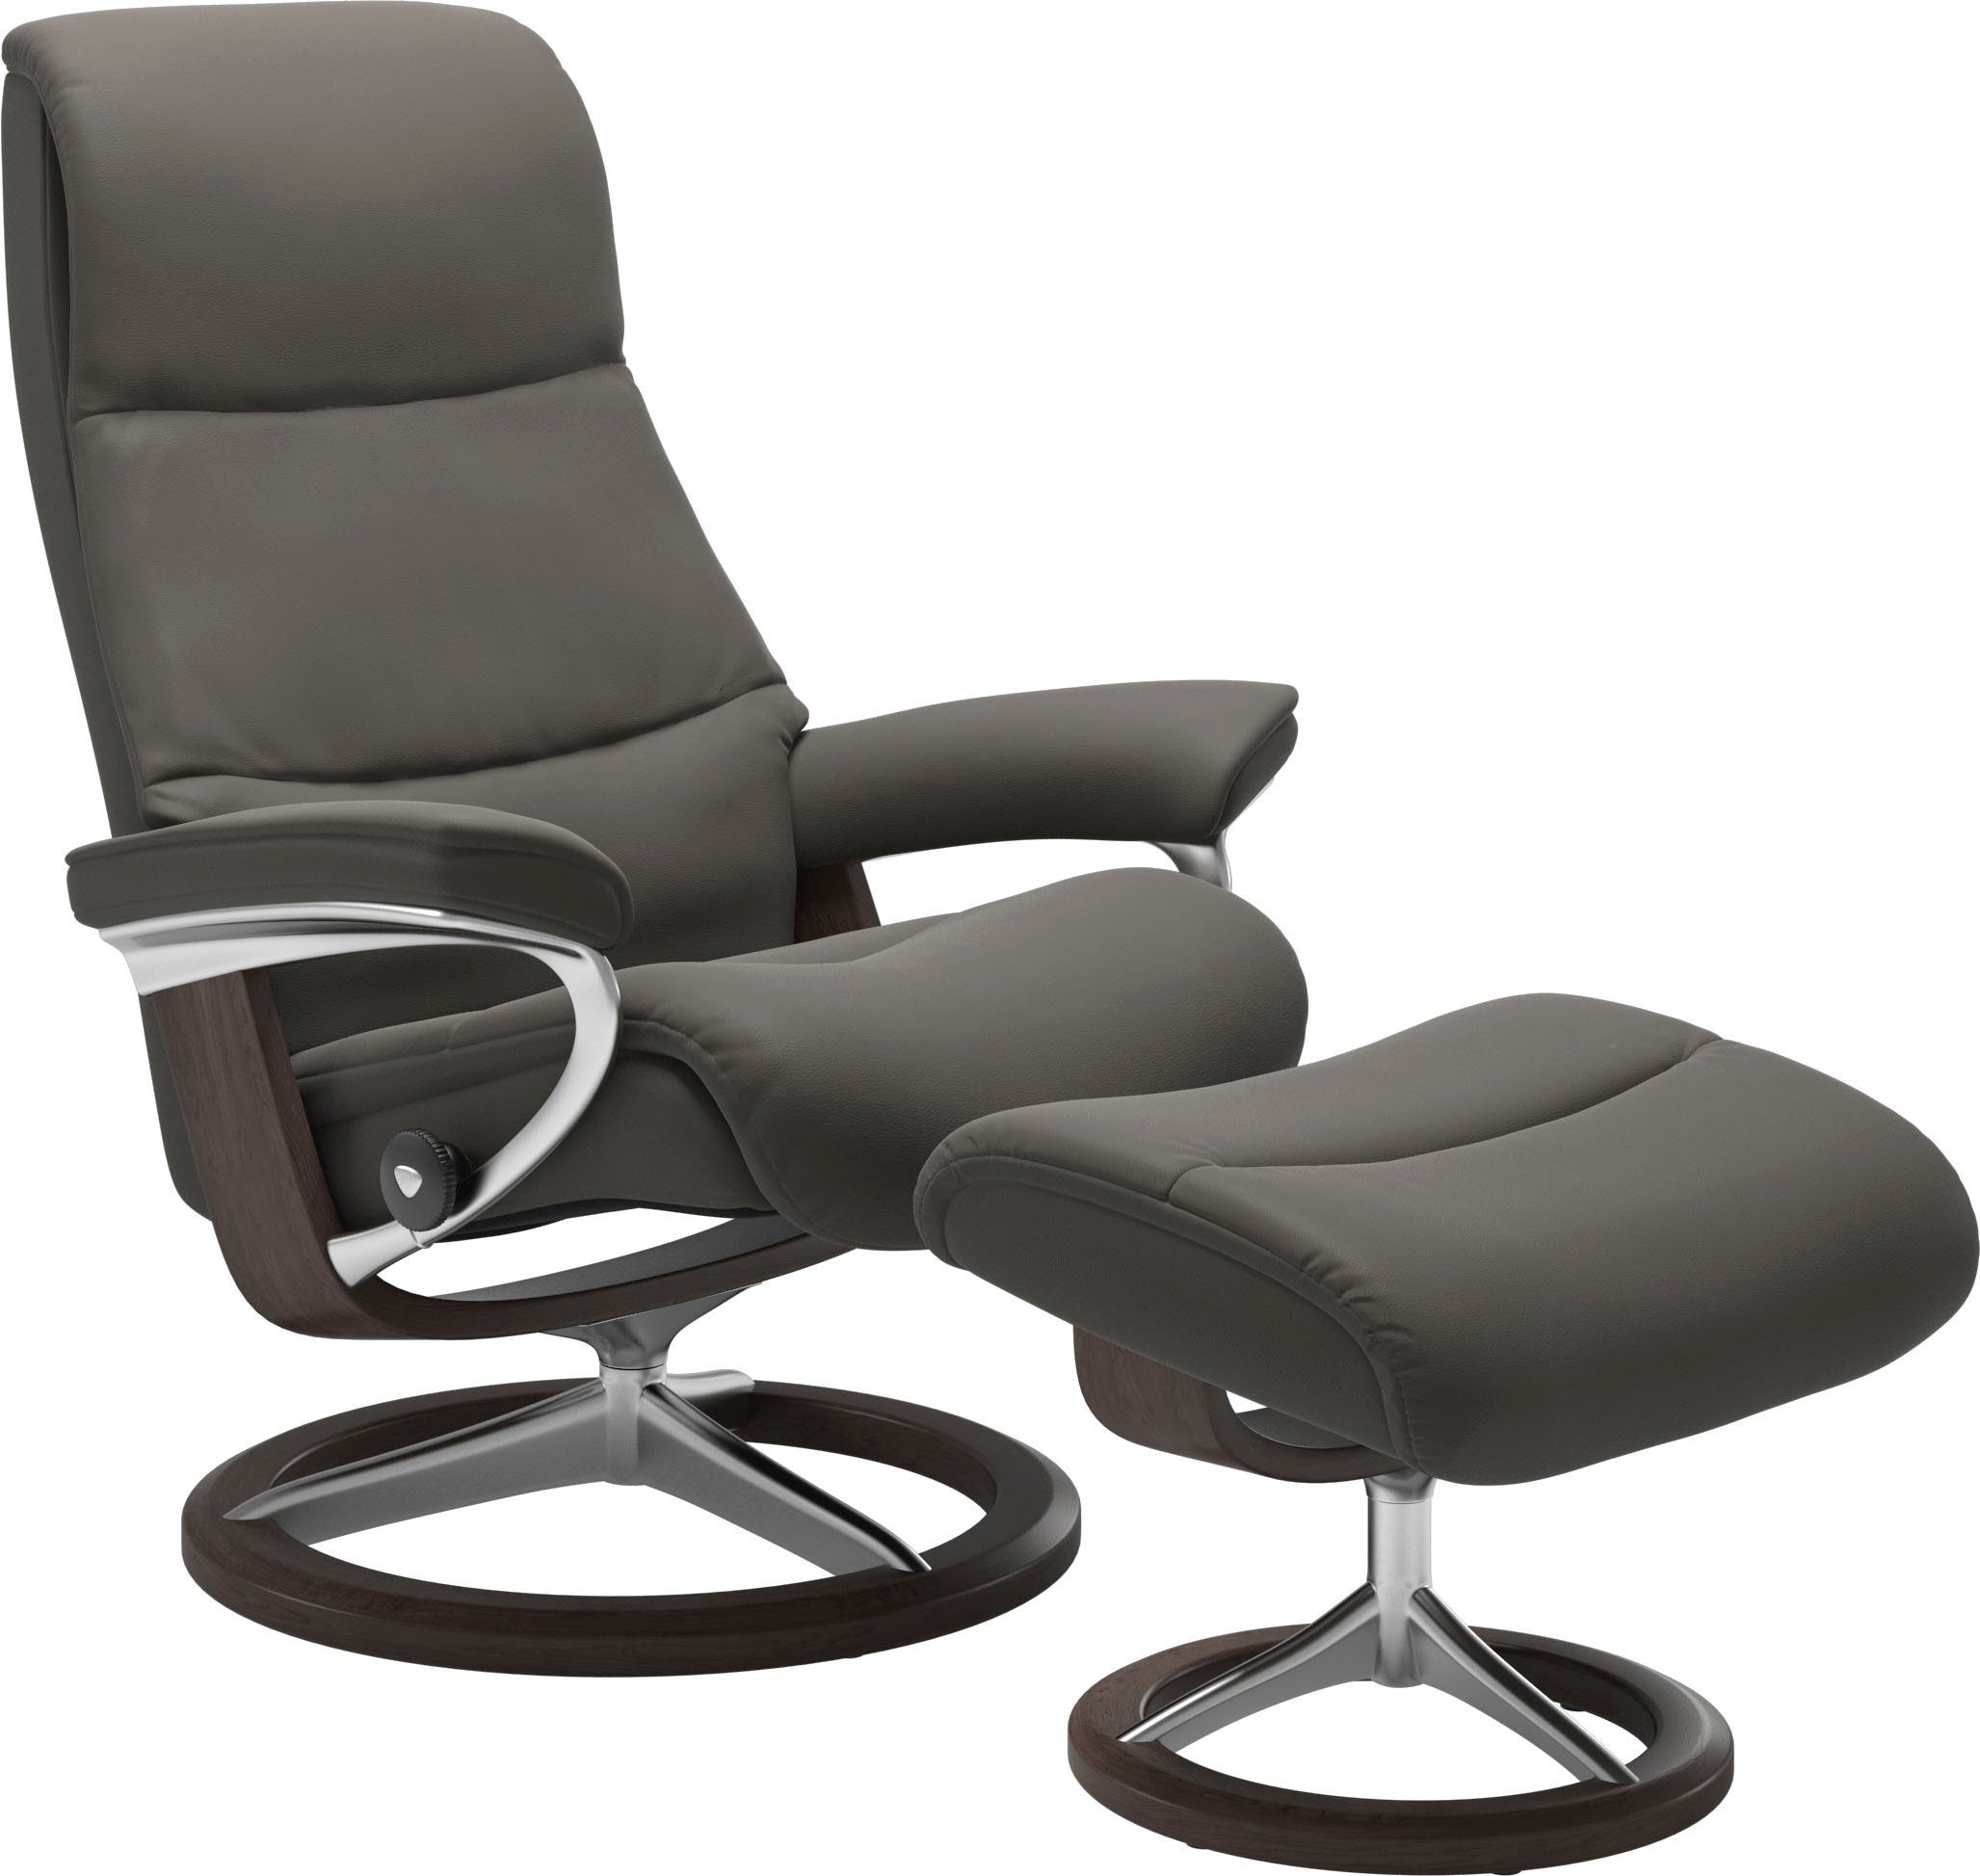 S,Gestell Stressless® Relaxsessel Wenge Größe View, Base, Signature mit